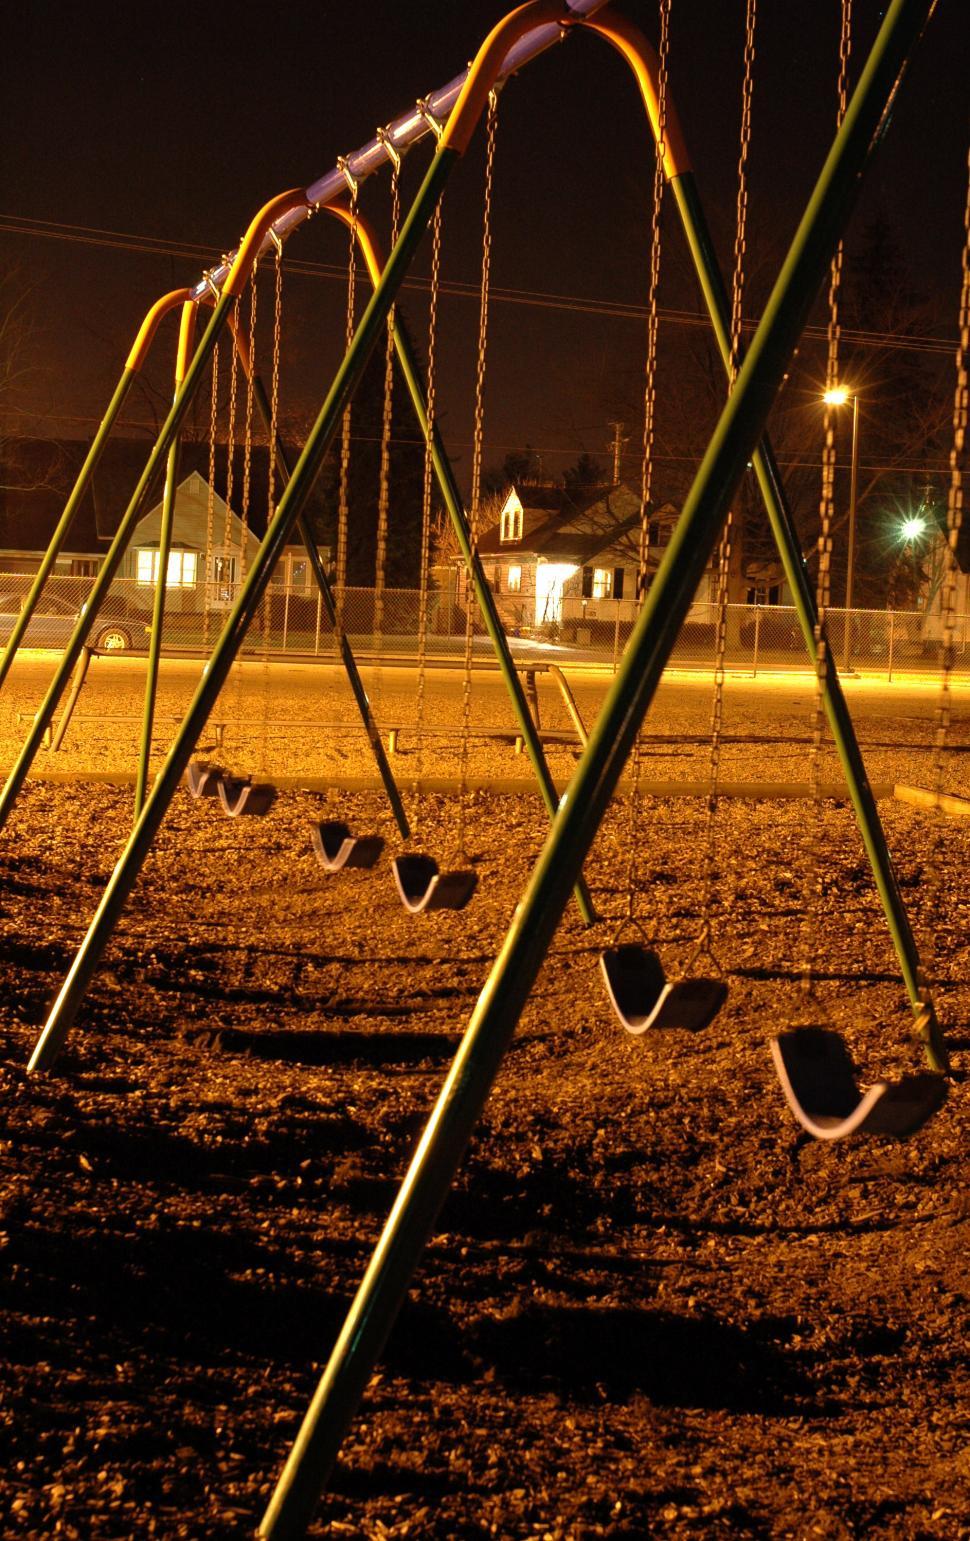 Free Image of A Row of Swings in a Park at Night 